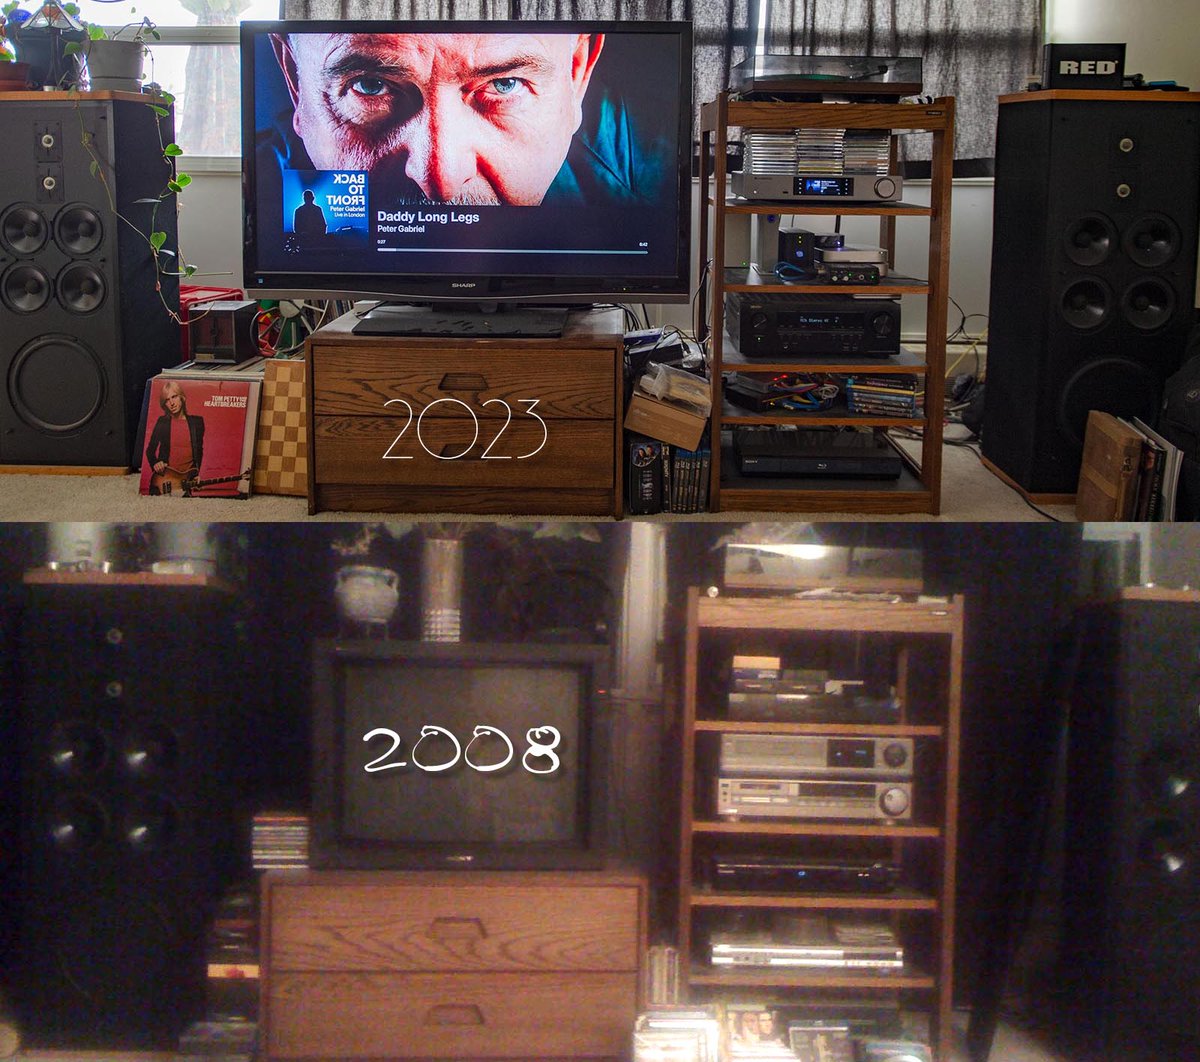 #retrohifi 2008: I played CD's, had VHS and Hi-8 vcr's.  In 2023, it's a media server feeding Hi Res digital audio to DAC and 4K or HD TV. The Rega Planar 2 is still there, as well as my Polk SDA 1C's and CD storage too! #music #vinylrecords #vinylcollection #dsd64